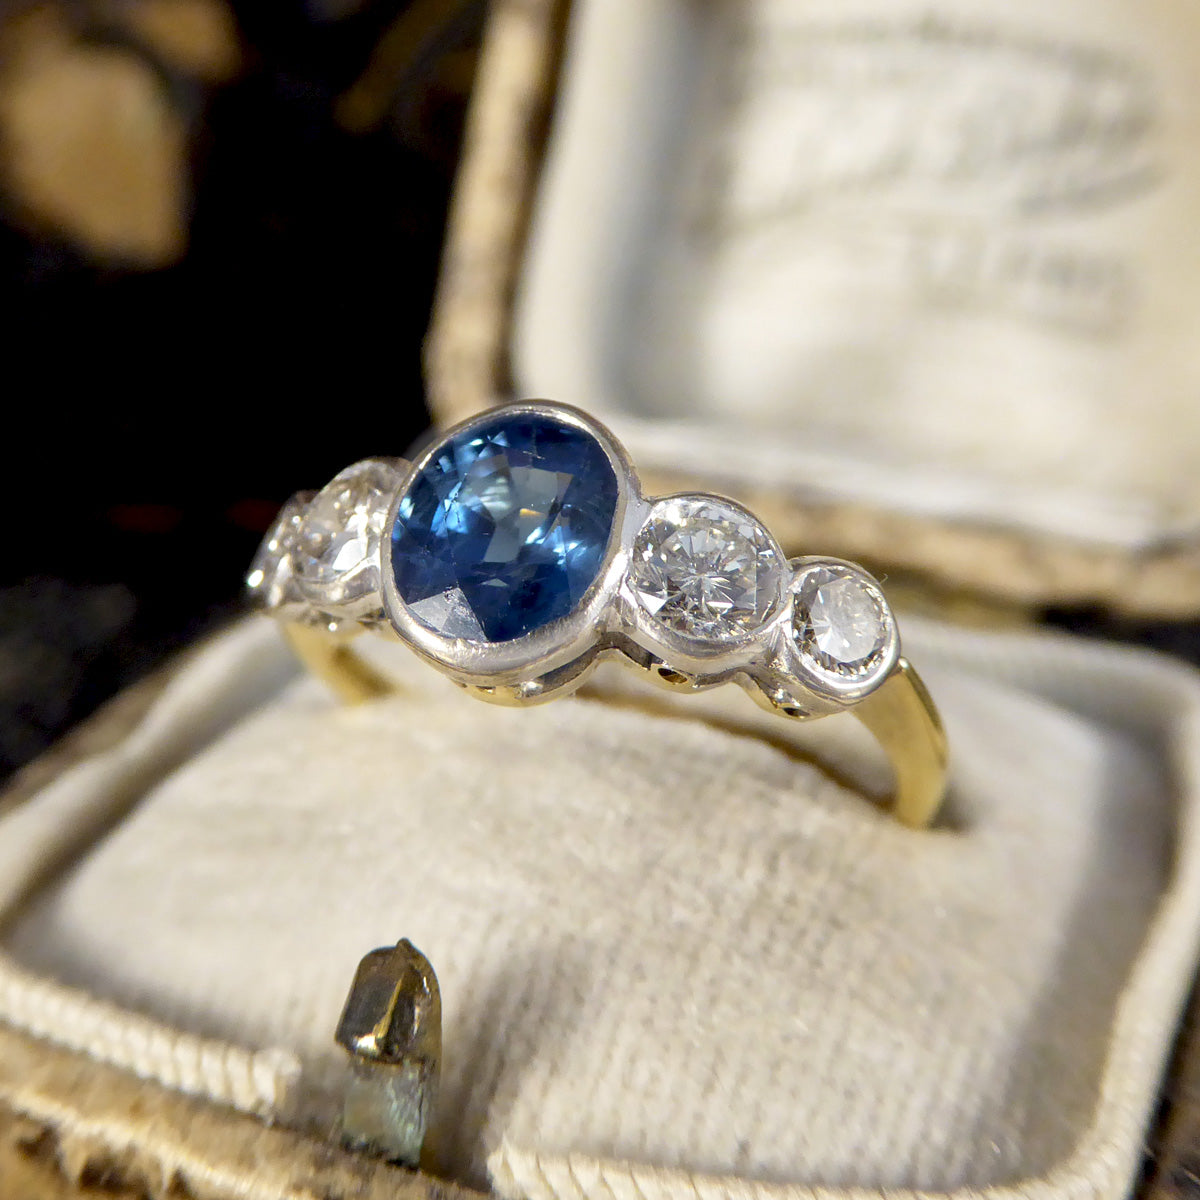 Edwardian Sapphire and Diamond Bezel Set Five Stone Ring in 18ct White and Yellow Gold